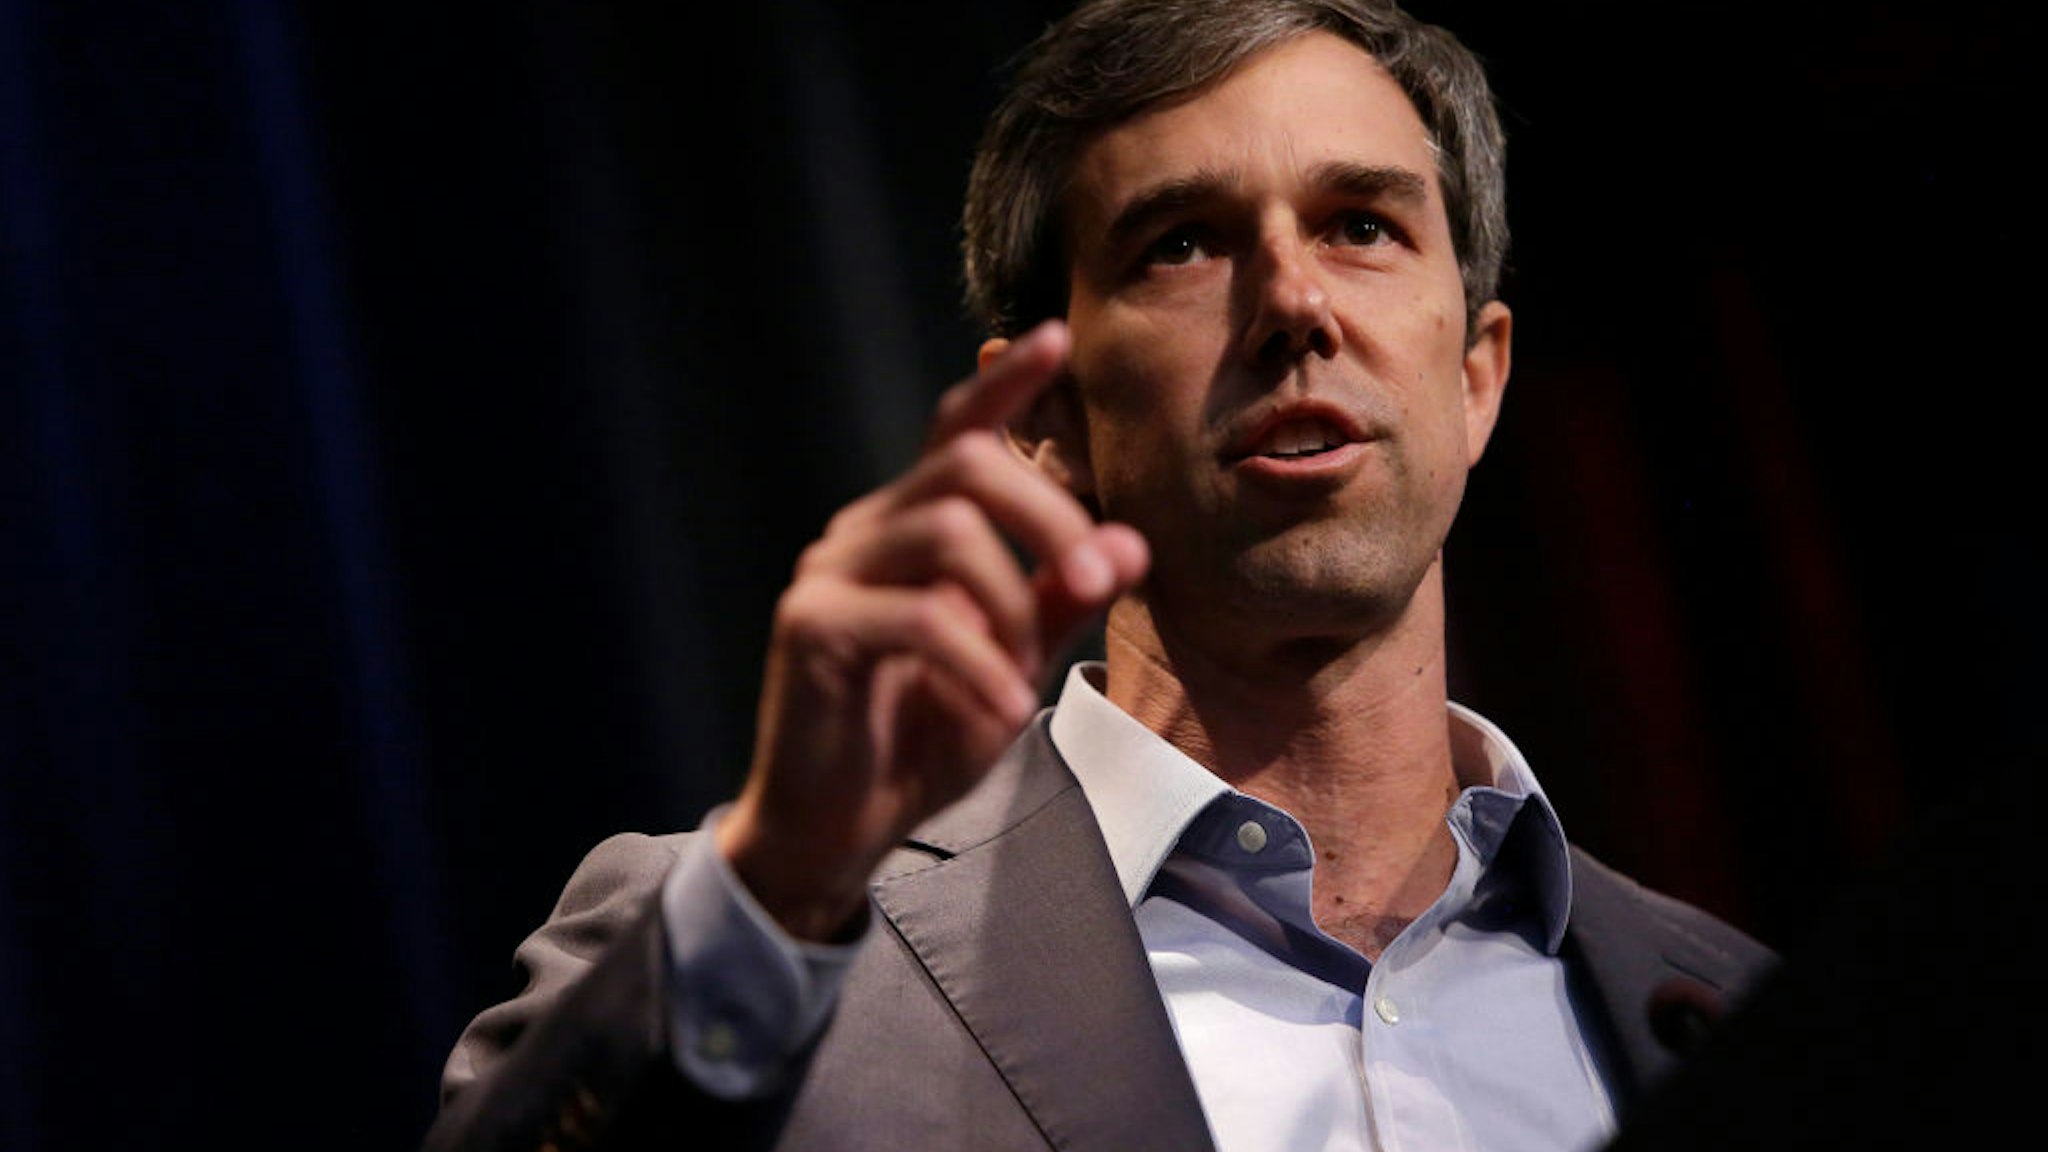 Beto O'Rourke speaks at the Iowa Federation Labor Convention on August 21, 2019